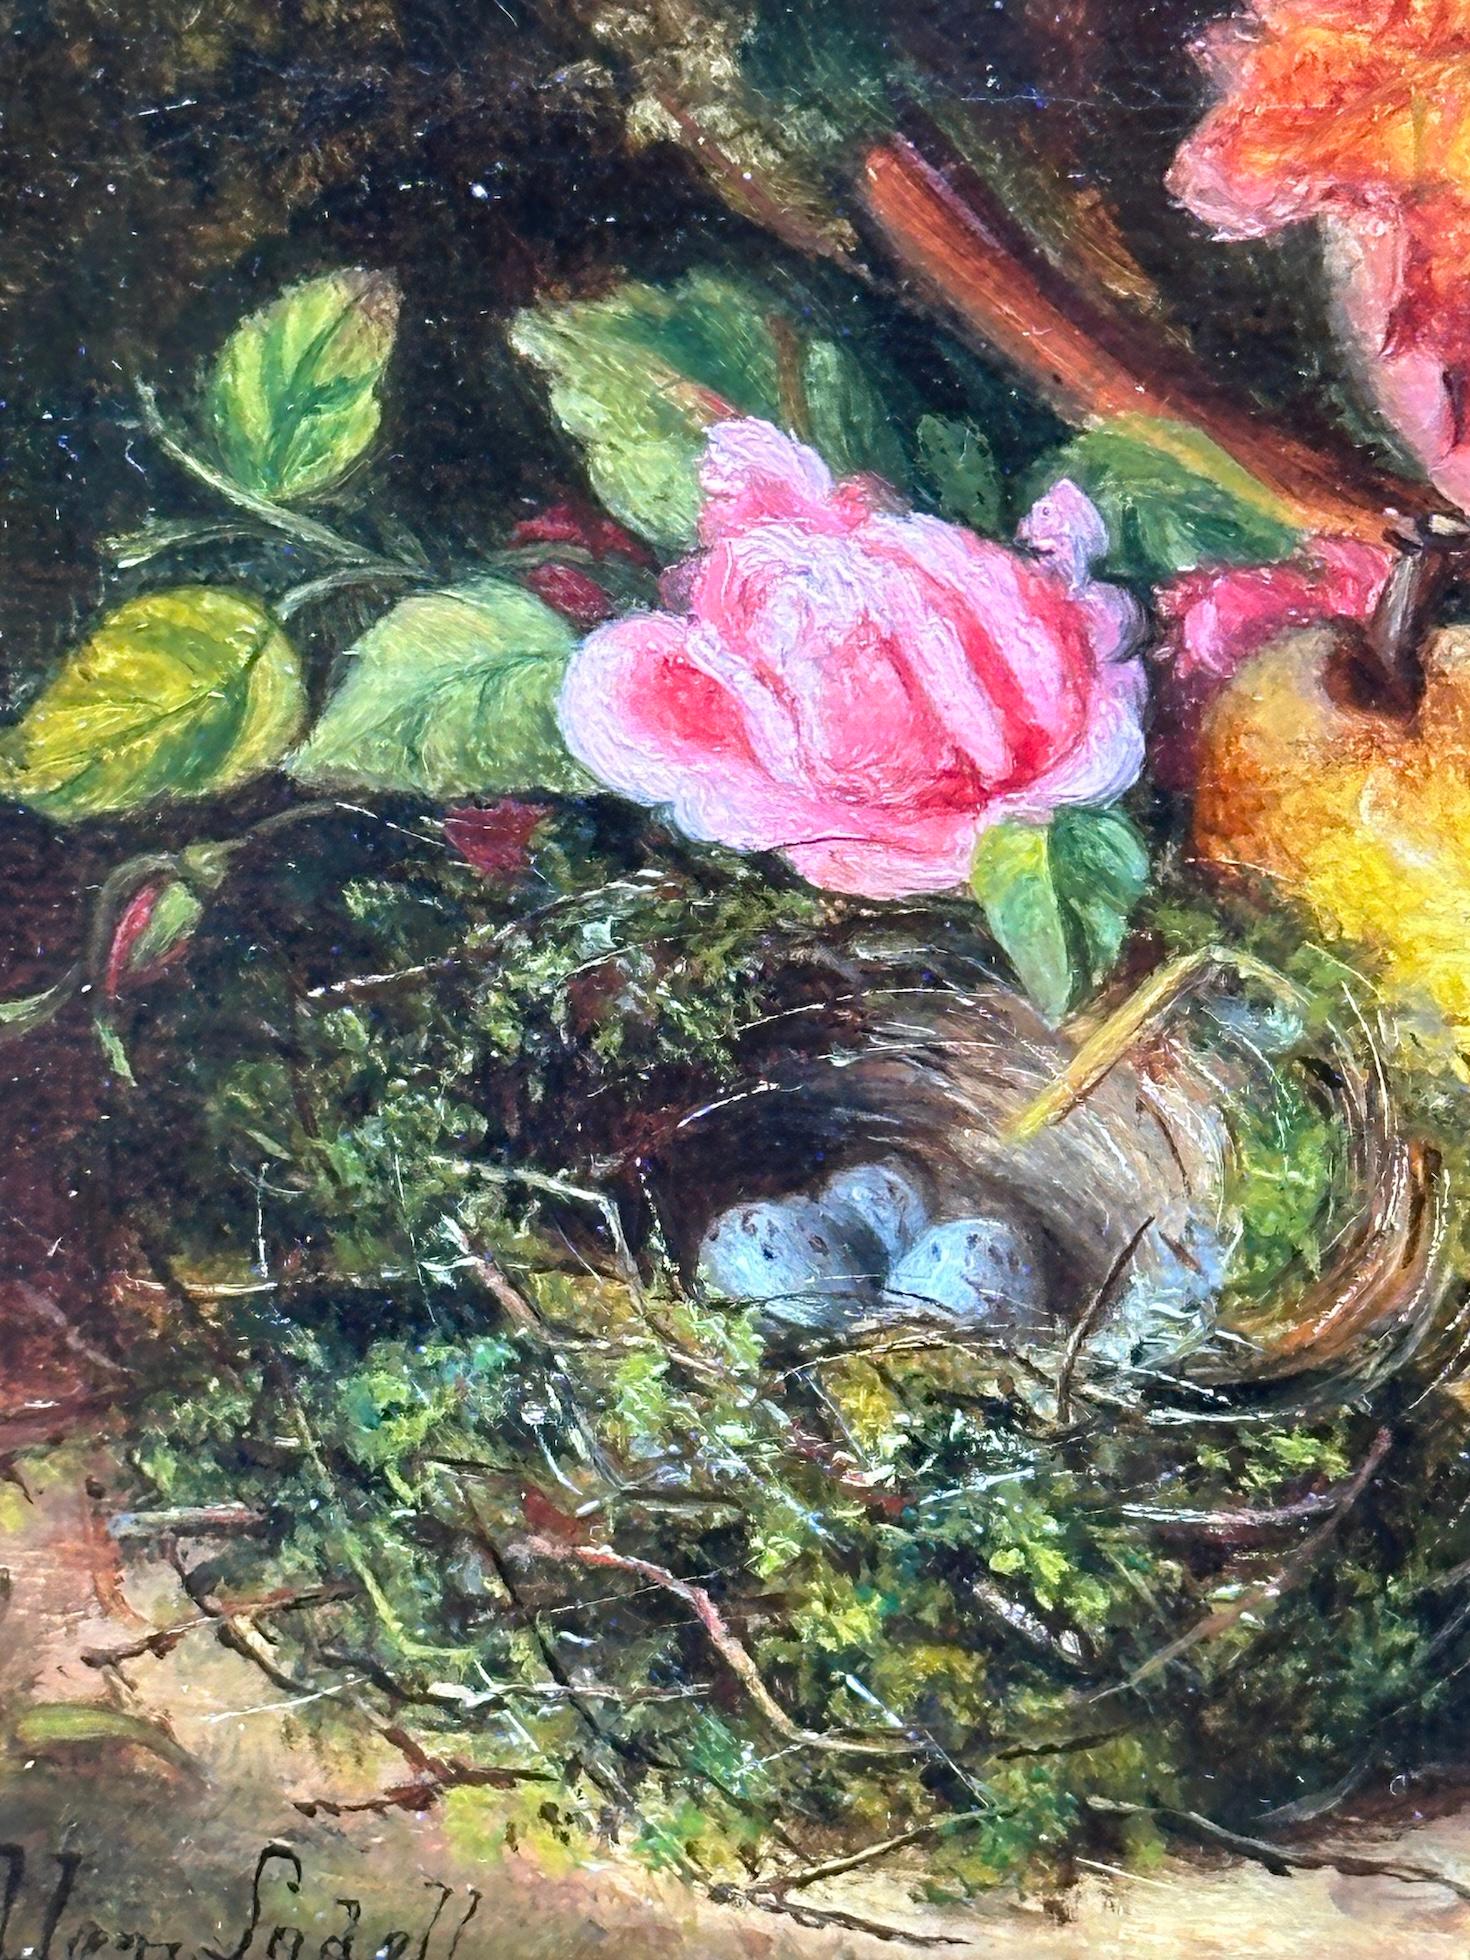 19th century English still life of flowers , fruit, birds nest in on a mossy bank by Ellen Ladell

Purchasing Ellen Ladell's 19th-century English still life of flowers, fruit, and a bird's nest on a mossy bank offers more than just an acquisition of